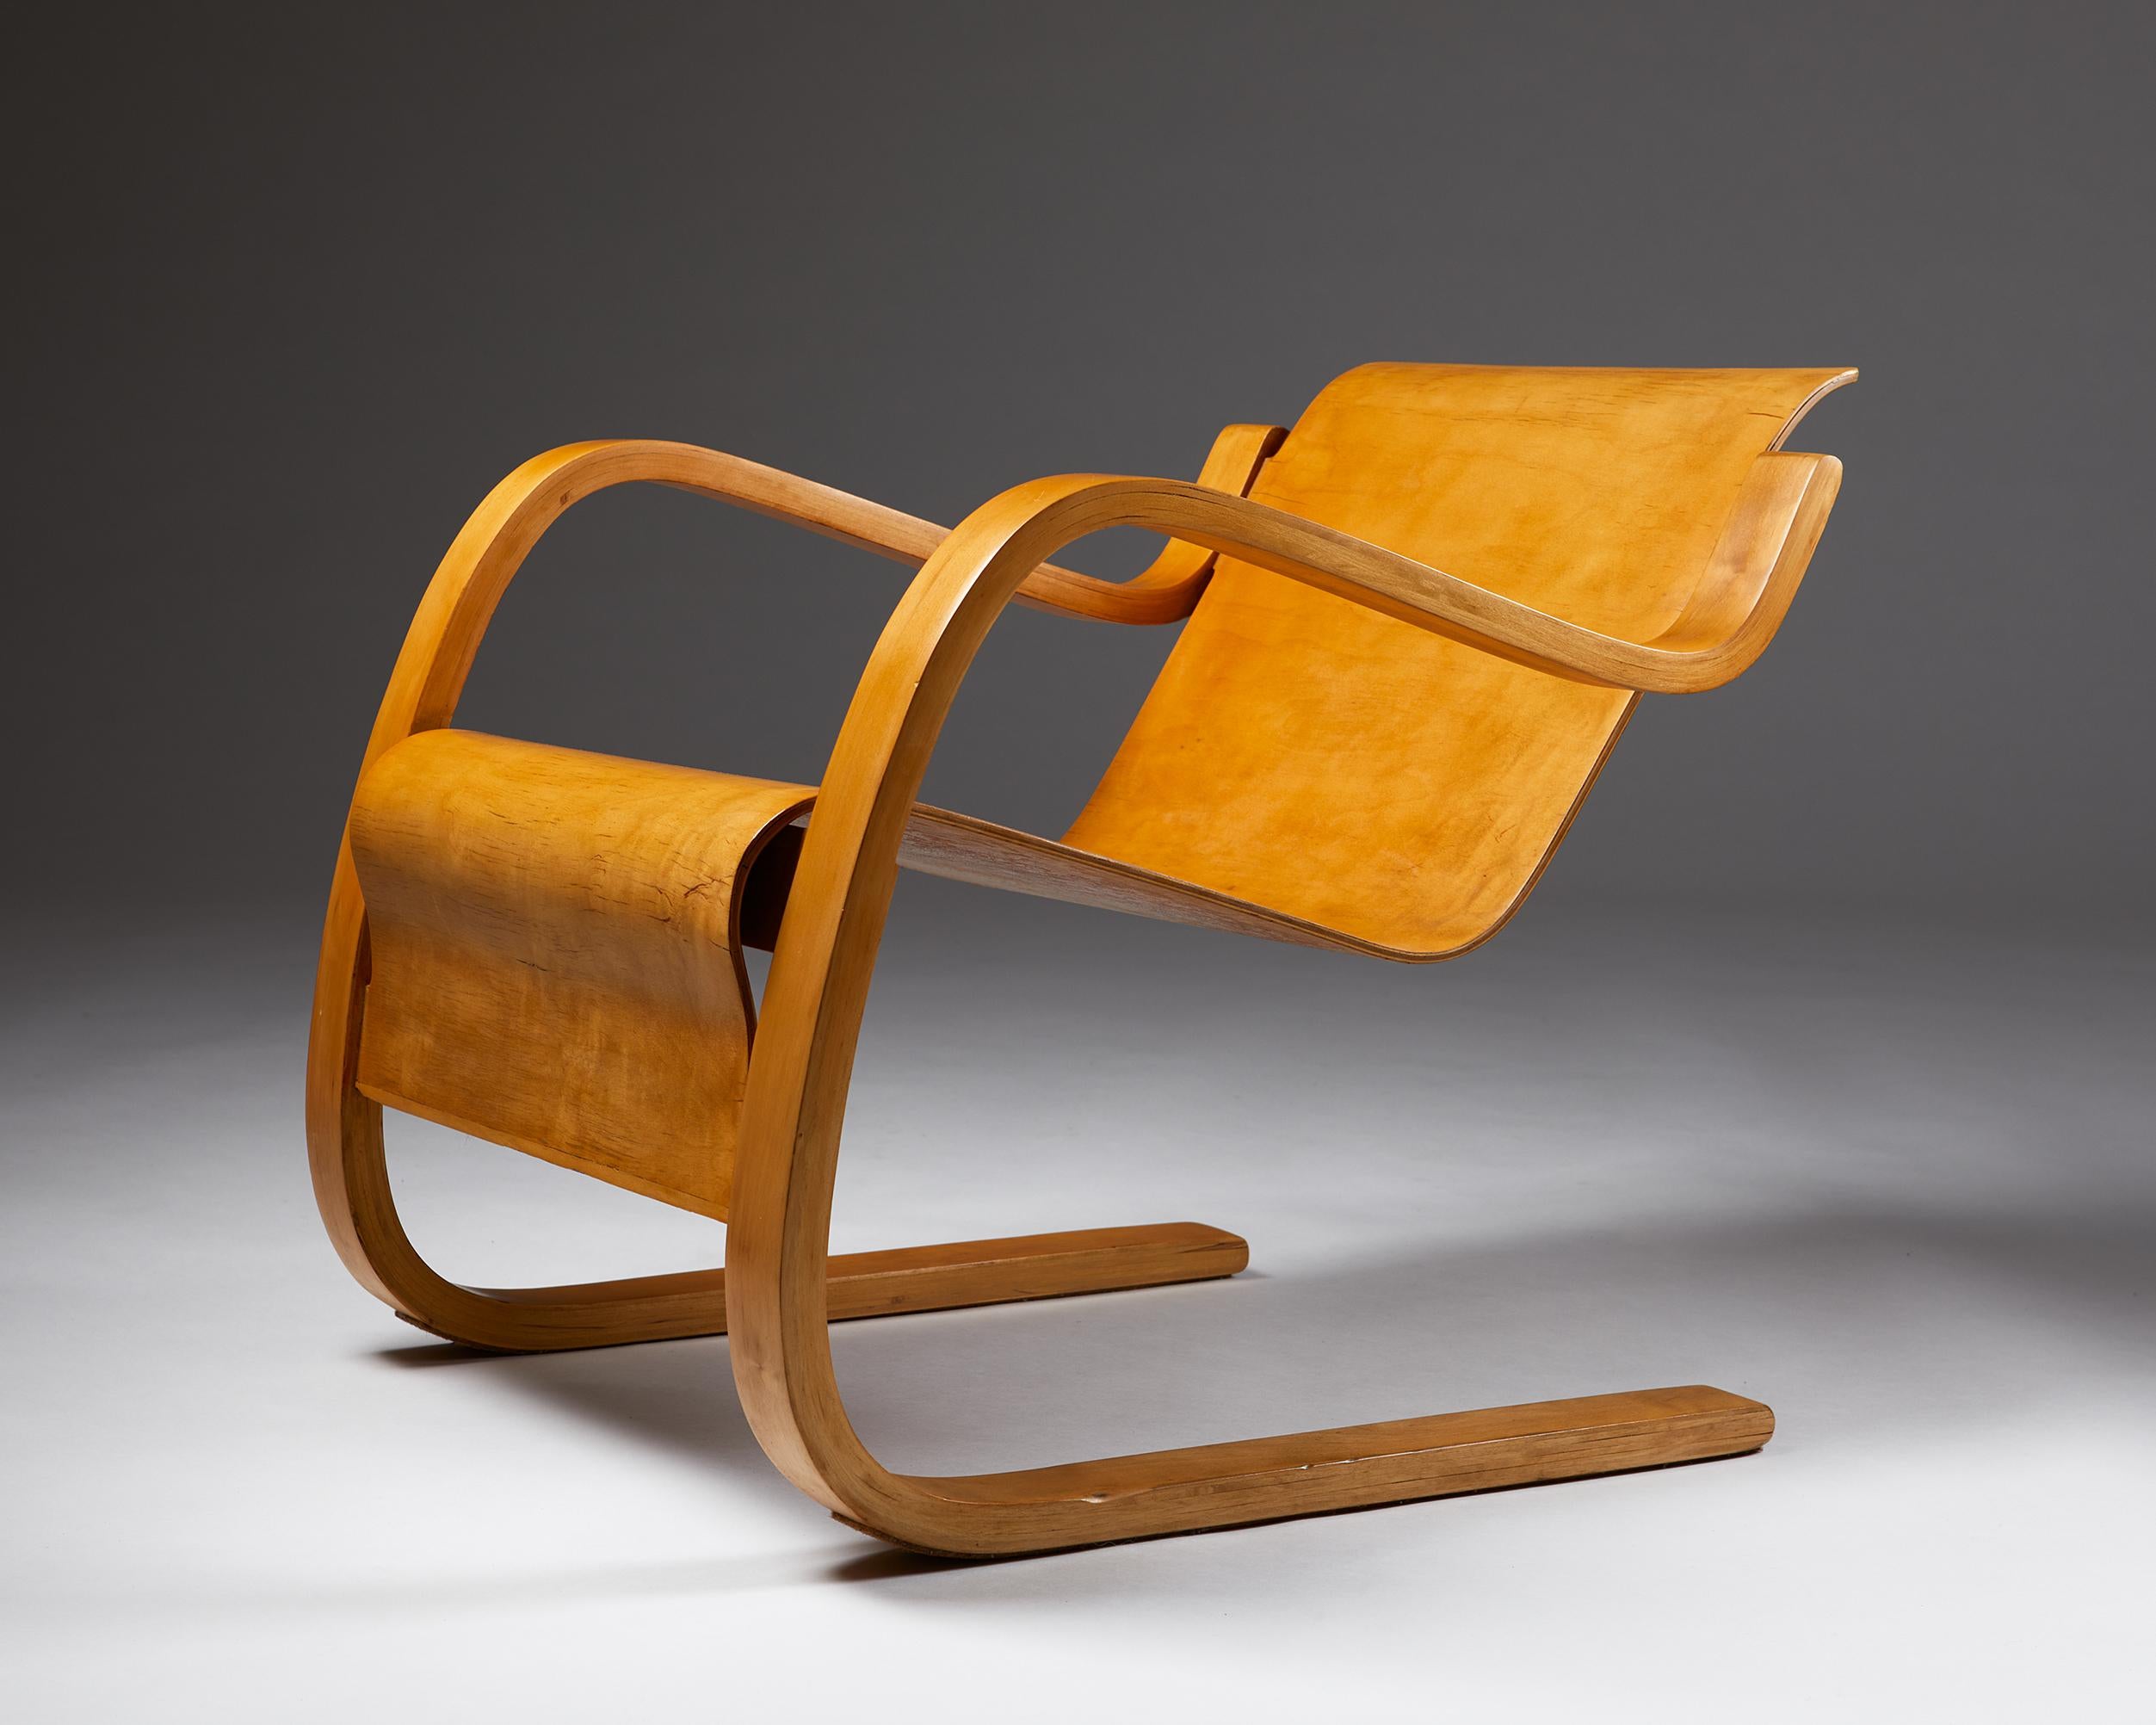 Armchair 42 “Little Paimio” Designed by Alvar Aalto, Finland, 1931 In Good Condition For Sale In Stockholm, SE